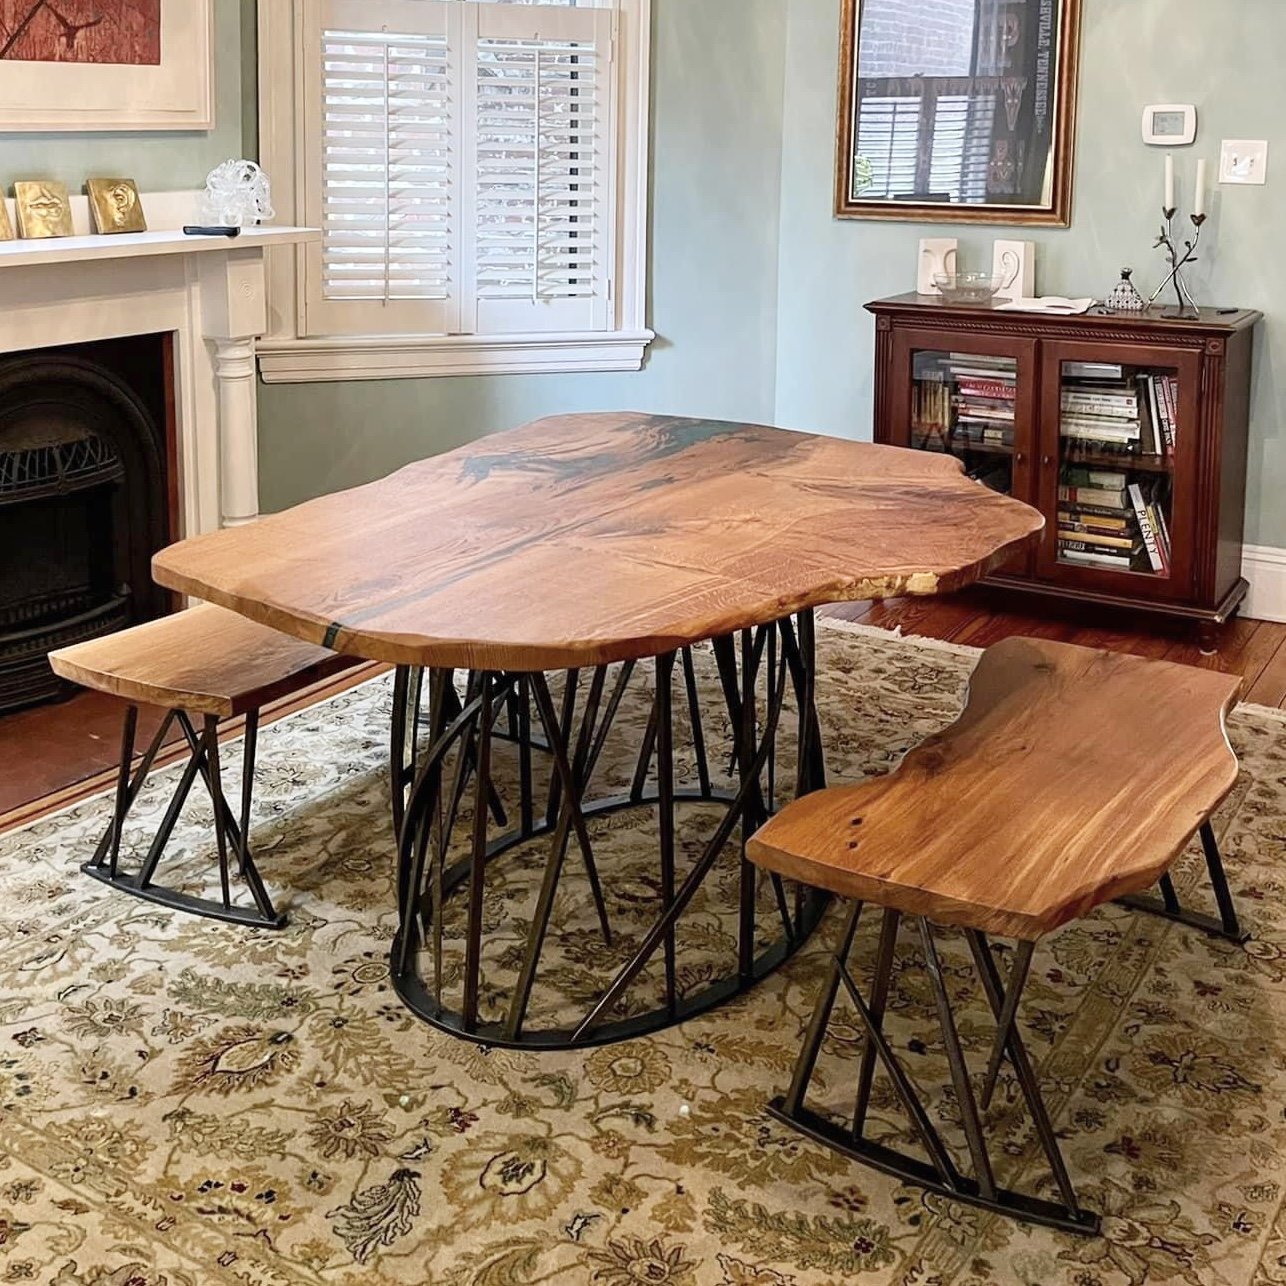 Dining table by Sallie Plumley Studio (walnut tops) and Phoenix Handcraft (forged steel bases)